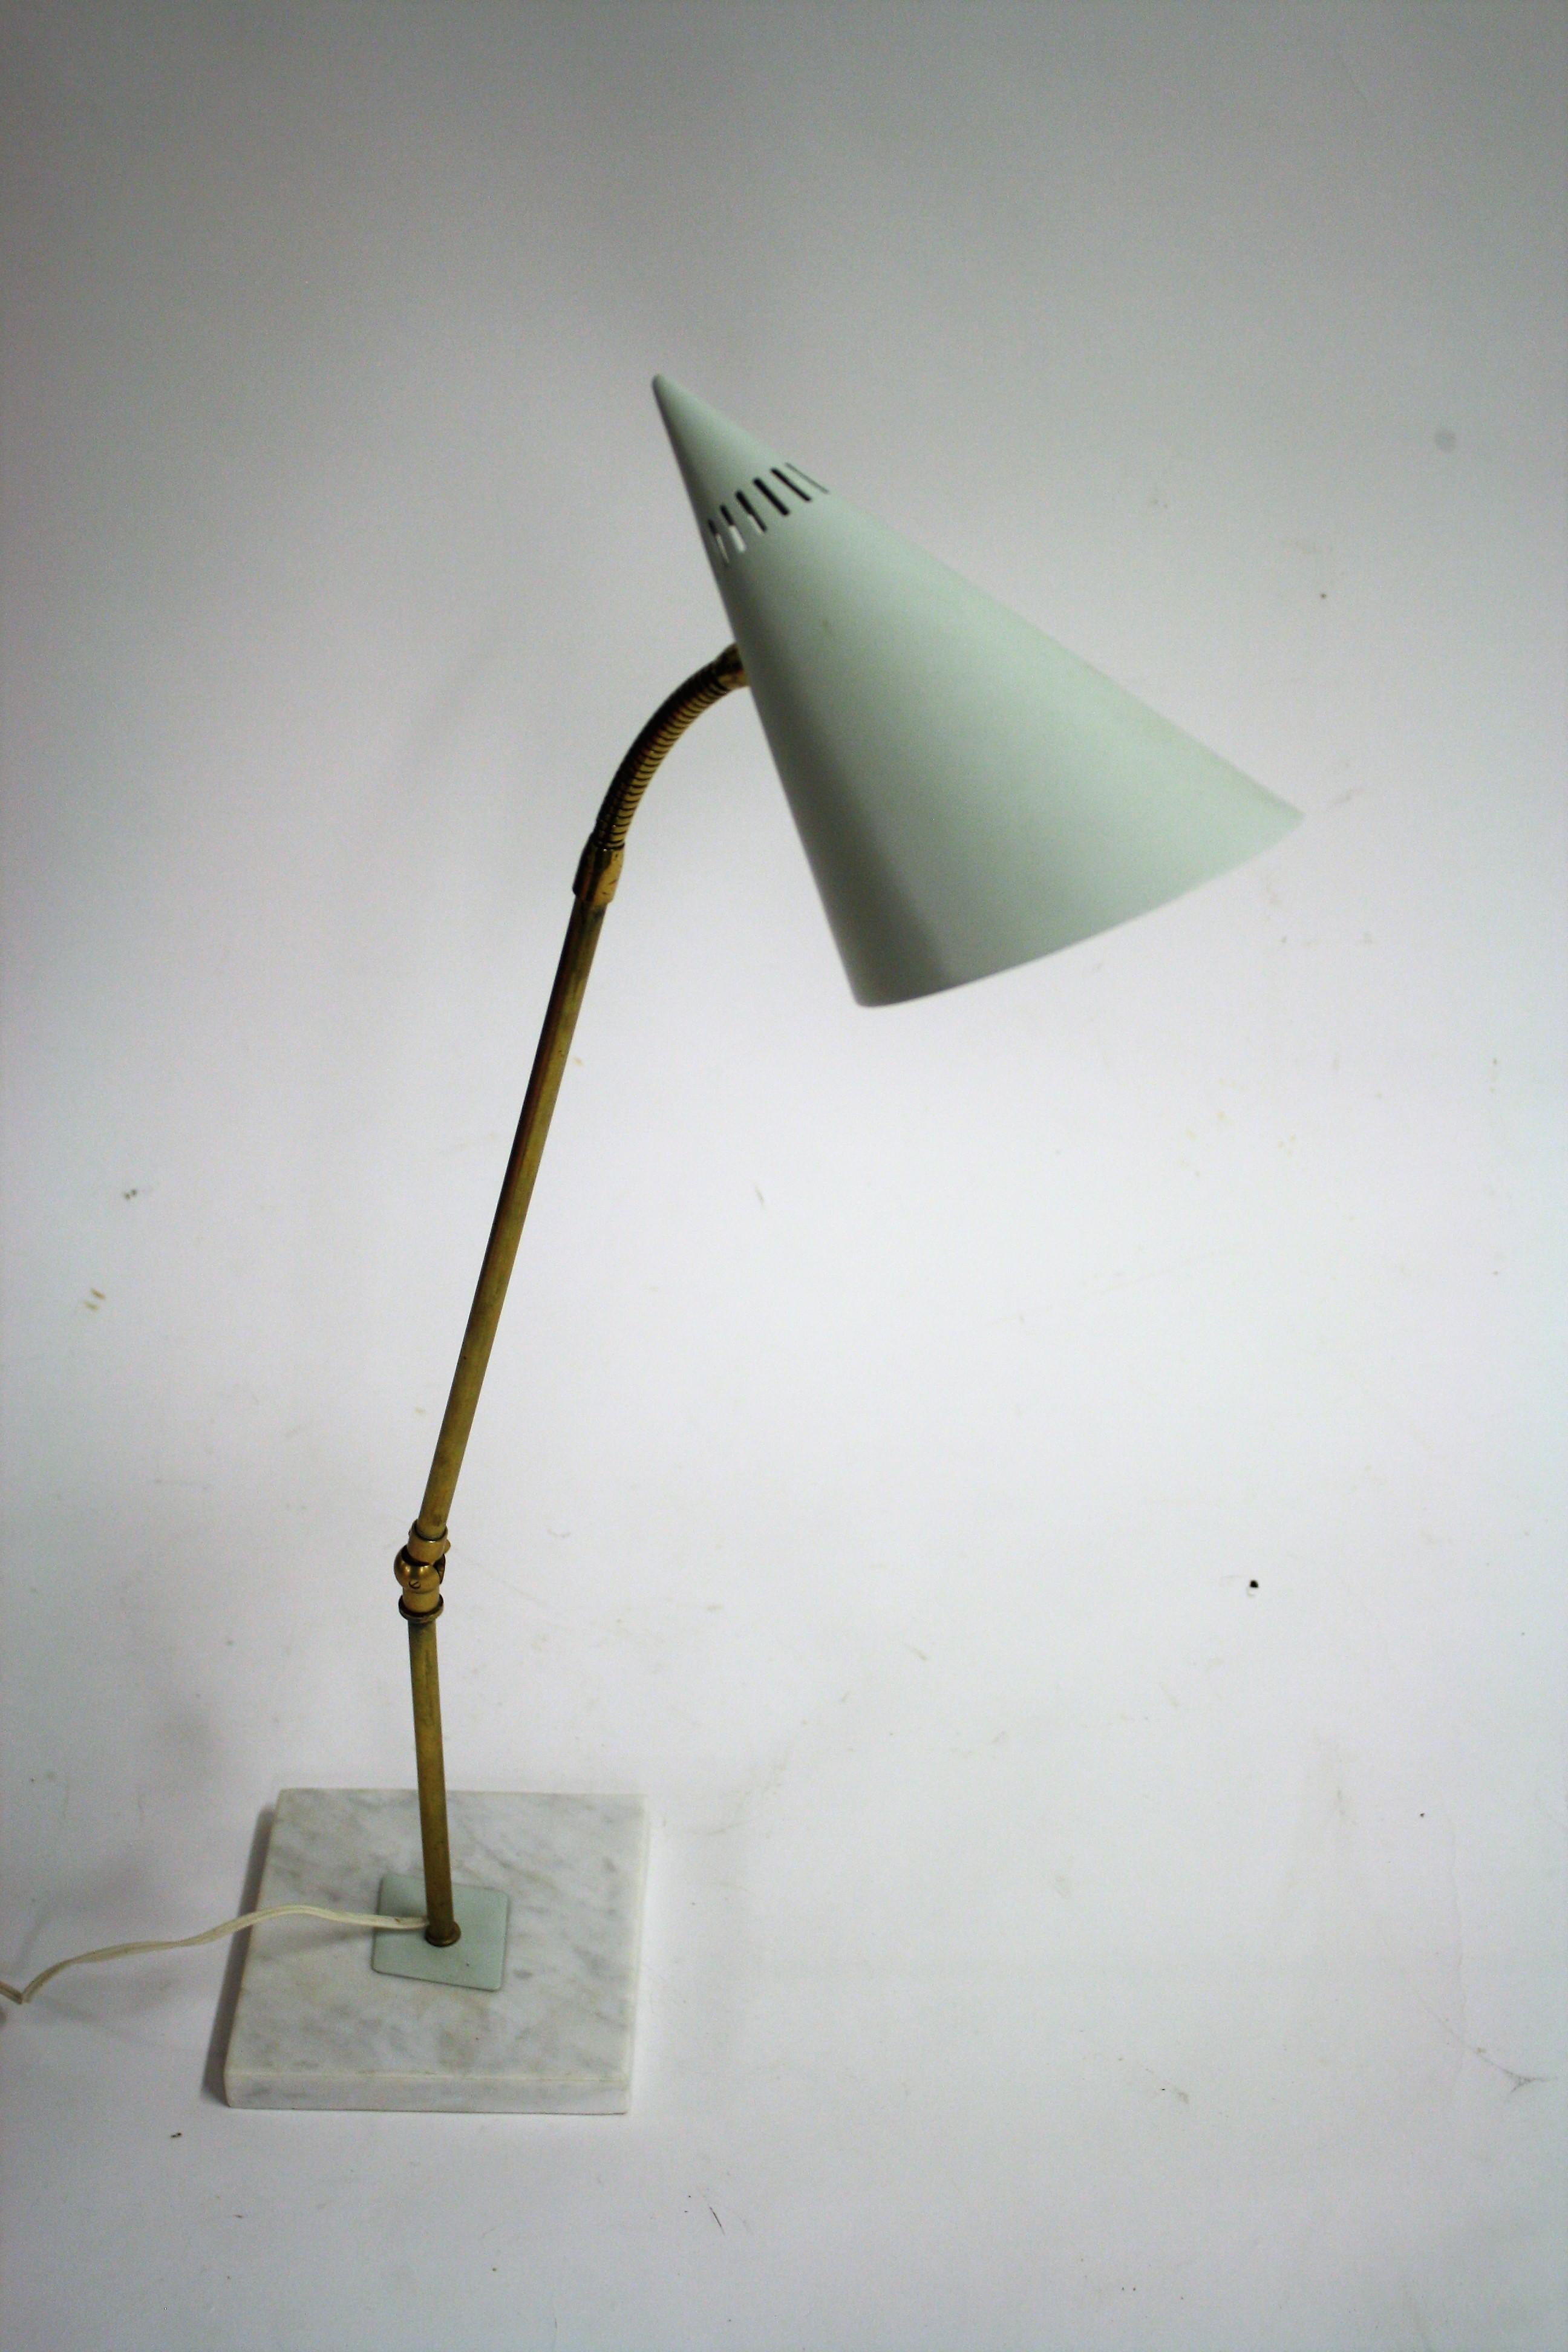 Midcentury adjustable desk lamp or table lamp.

The lamp consist of an articulated arm mounted on a white marble base and a flexible shade holder. 

Beautiful white perforated shade creating a warm and diverted light.

Good condition, tested